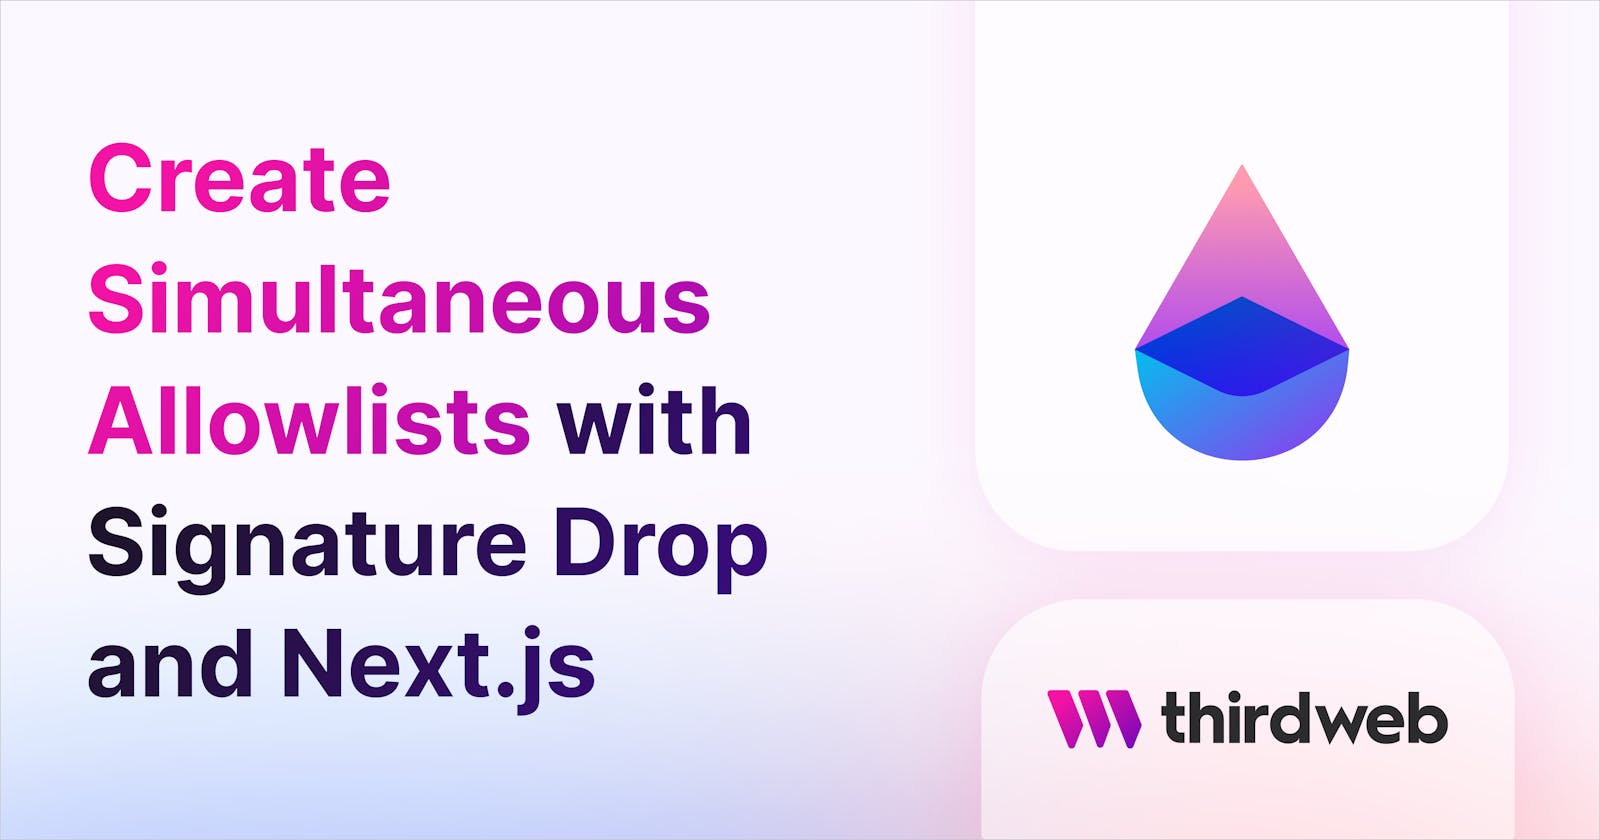 Create Simultaneous Allowlists with Signature Drop and Next.js